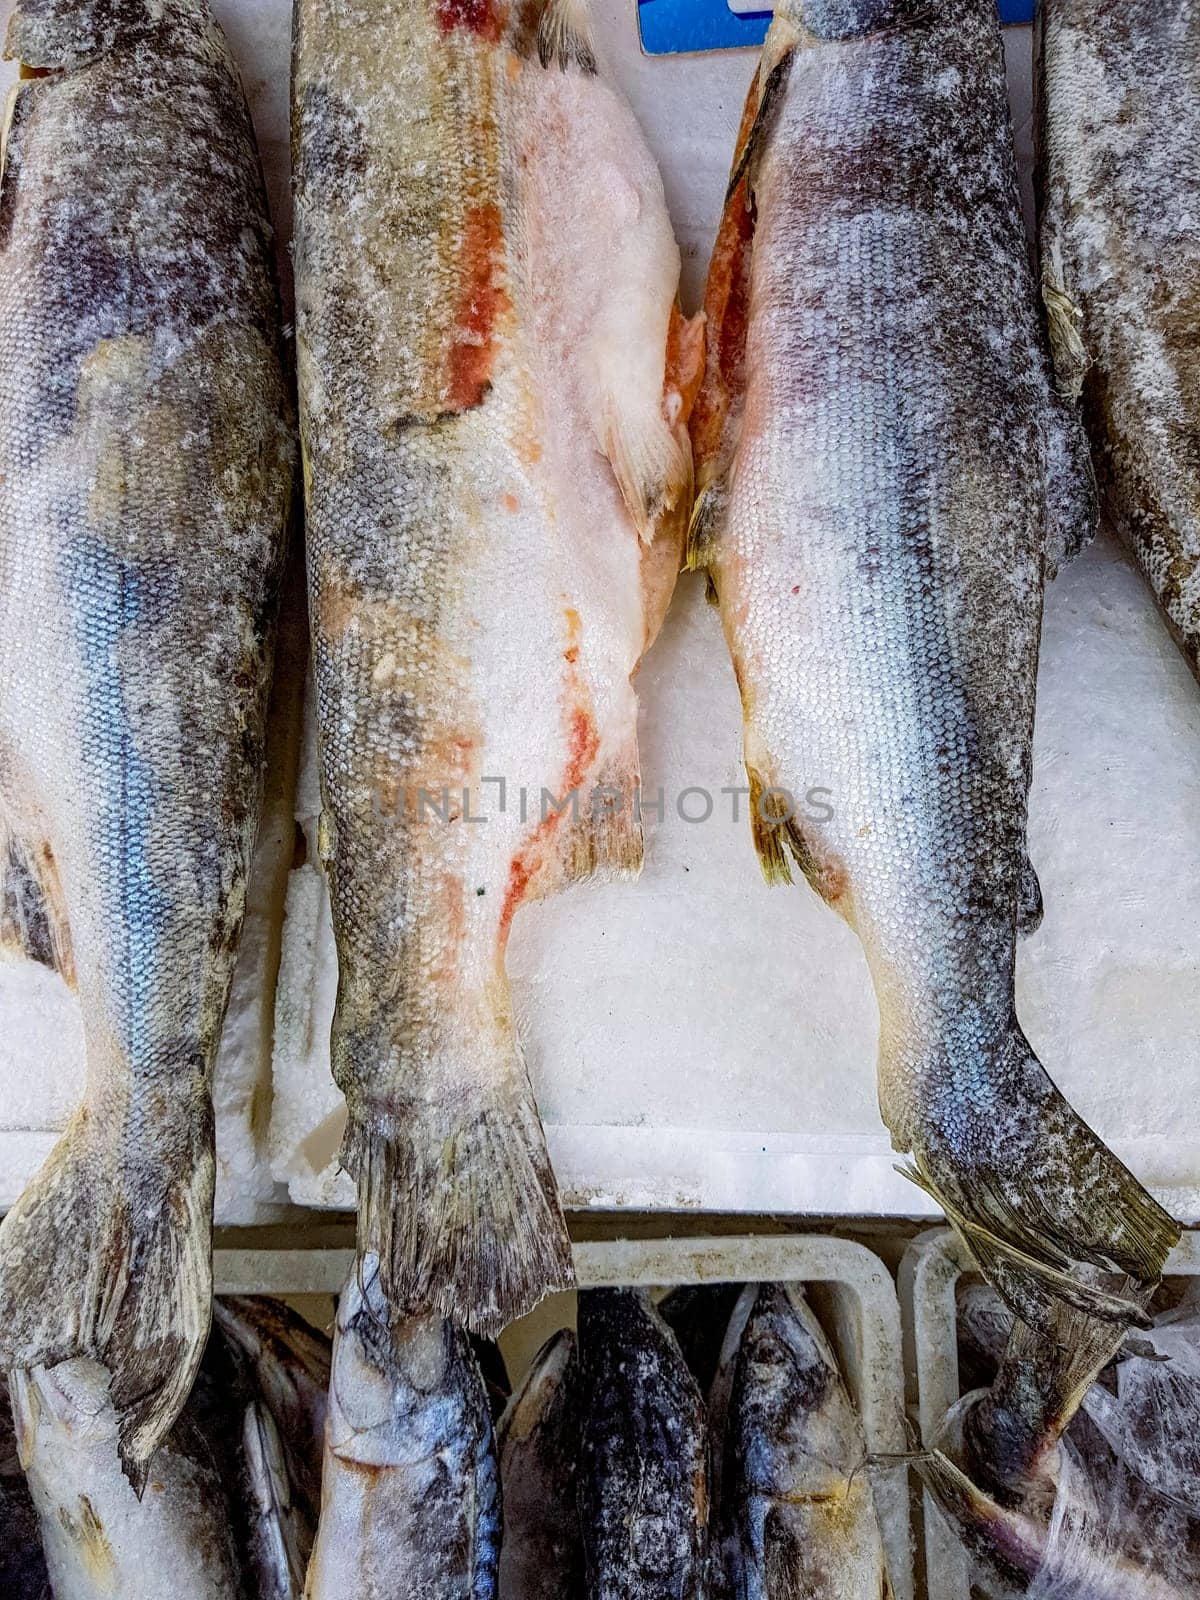 Frozen carcasses of red fish lie on ice on the counter of the fish market, top view, close-up